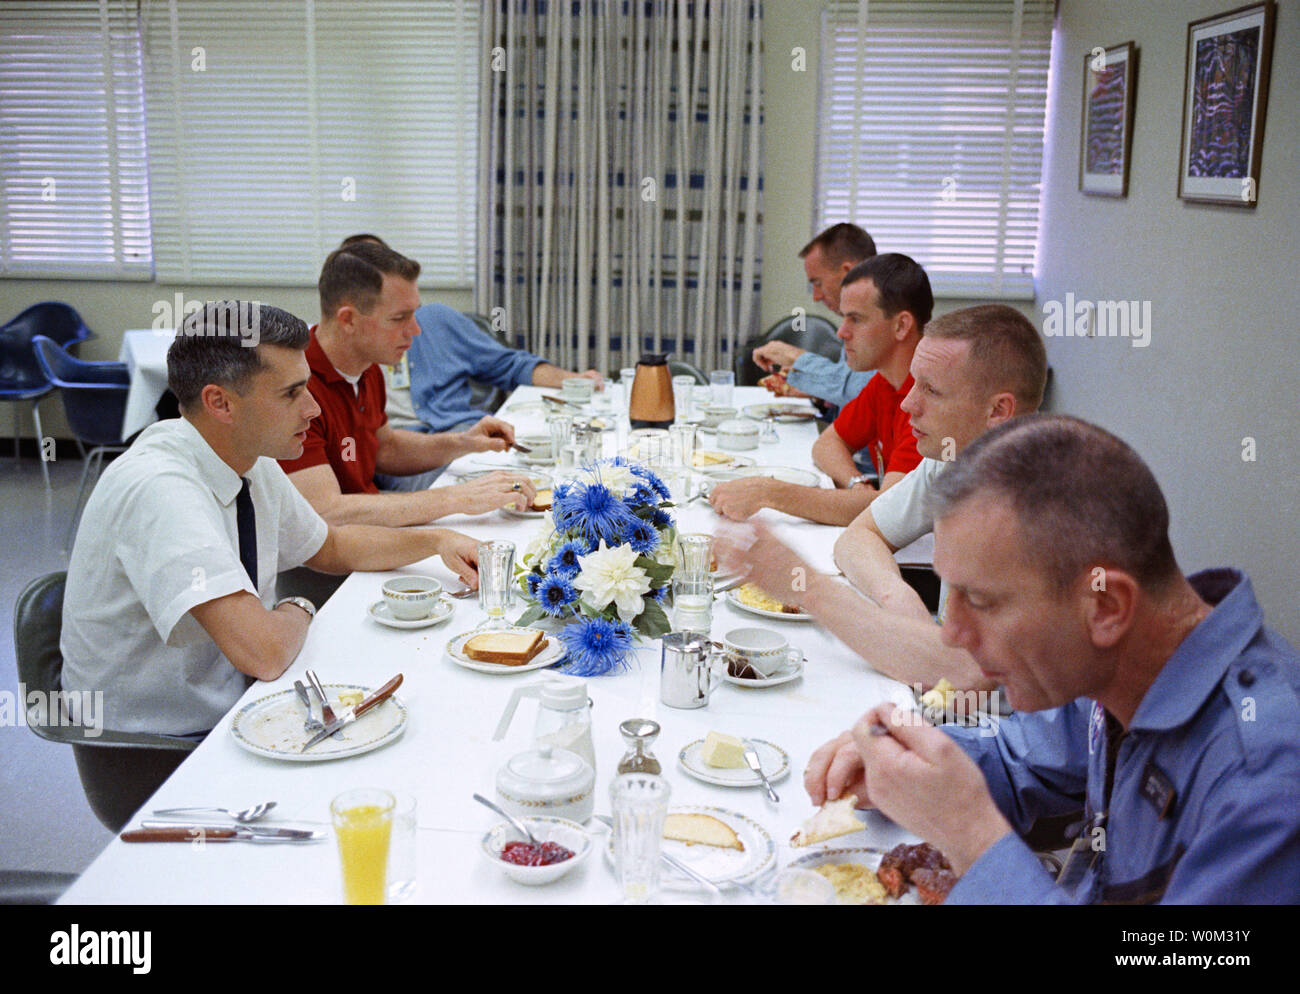 The Gemini 8 prime crew, along with several fellow astronauts, have a hearty breakfast of steak and eggs on March 16, 1966, the morning of the Gemini 8 launch. Seated clockwise around the table, starting at lower right, are Deke Slayton, Manned Spaceflight Center (MSC) Assistant Director for Flight Crew Operations; astronaut Neil Armstrong, Gemini 8 command pilot; scientist-astronaut Curt Michel; astronaut Walter Cunningham; astronaut Alan Shepard (face obscured), Chief, MSC Astronaut Office; astronaut David Scott, Gemini 8 pilot; and astronaut Roger Chaffee. March 16, 2016 marks the 50th anni Stock Photo